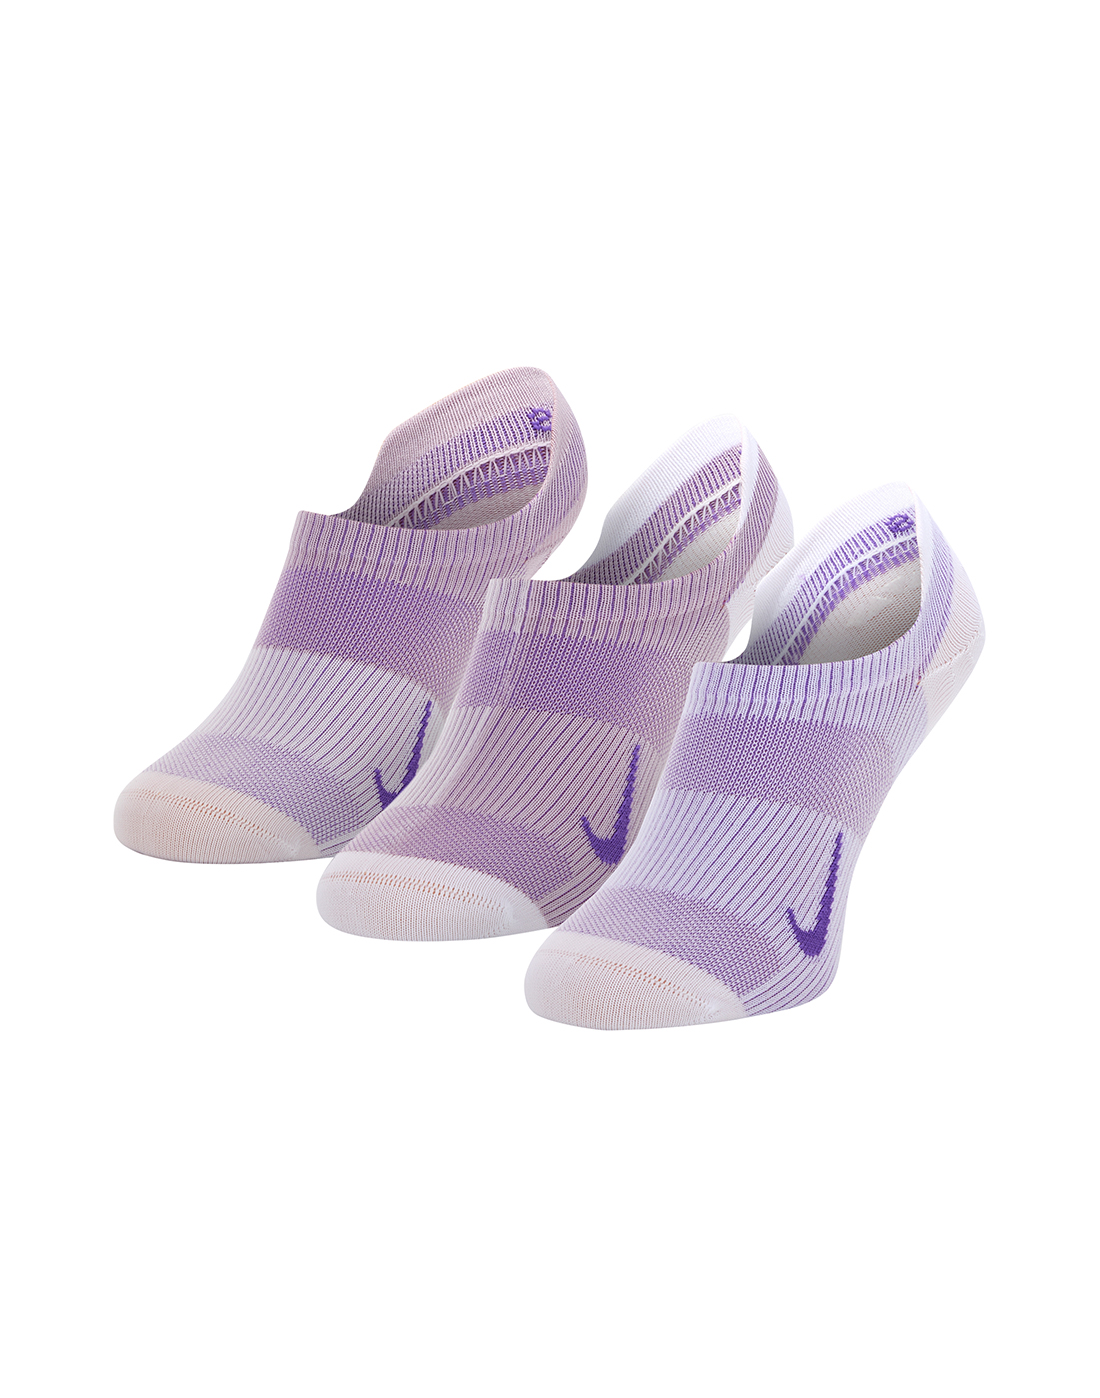 nike water shoes adults